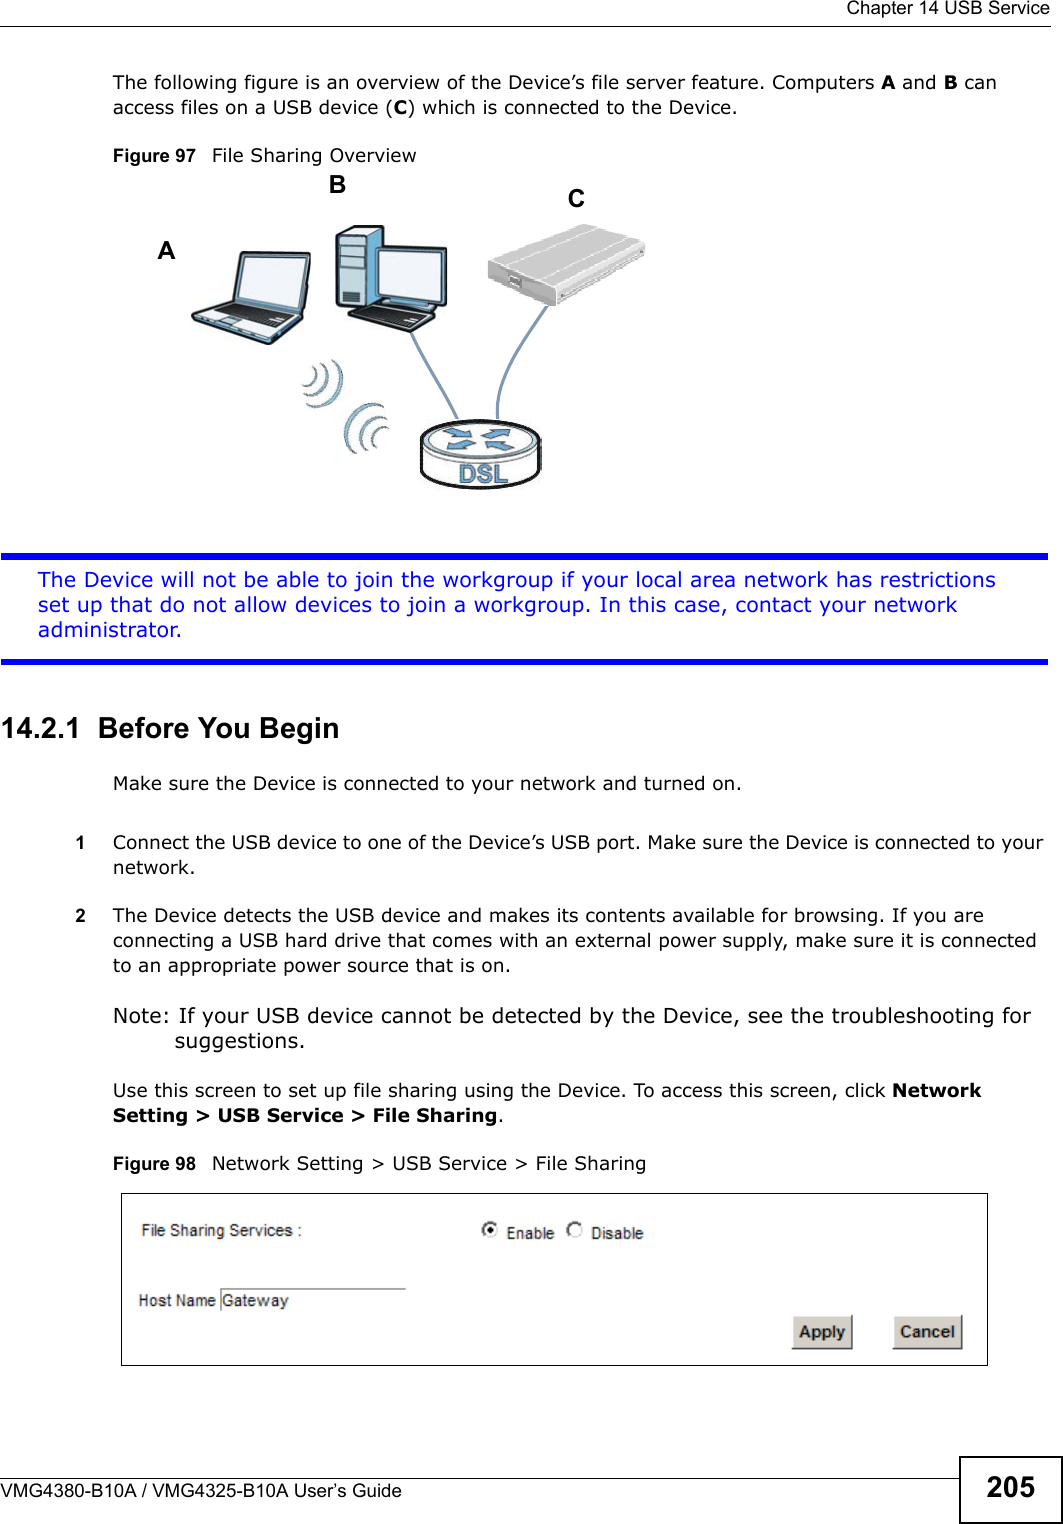 Chapter 14 USB ServiceVMG4380-B10A / VMG4325-B10A User’s Guide 205The following figure is an overview of the Device’s file server feature. Computers A and B can access files on a USB device (C) which is connected to the Device.Figure 97   File Sharing OverviewThe Device will not be able to join the workgroup if your local area network has restrictions set up that do not allow devices to join a workgroup. In this case, contact your networkadministrator.14.2.1  Before You BeginMake sure the Device is connected to your network and turned on.1Connect the USB device to one of the Device’s USB port. Make sure the Device is connected to your network.2The Device detects the USB device and makes its contents available for browsing. If you areconnecting a USB hard drive that comes with an external power supply, make sure it is connectedto an appropriate power source that is on.Note: If your USB device cannot be detected by the Device, see the troubleshooting for suggestions.Use this screen to set up file sharing using the Device. To access this screen, click Network Setting &gt; USB Service &gt; File Sharing.Figure 98   Network Setting &gt; USB Service &gt; File SharingABC